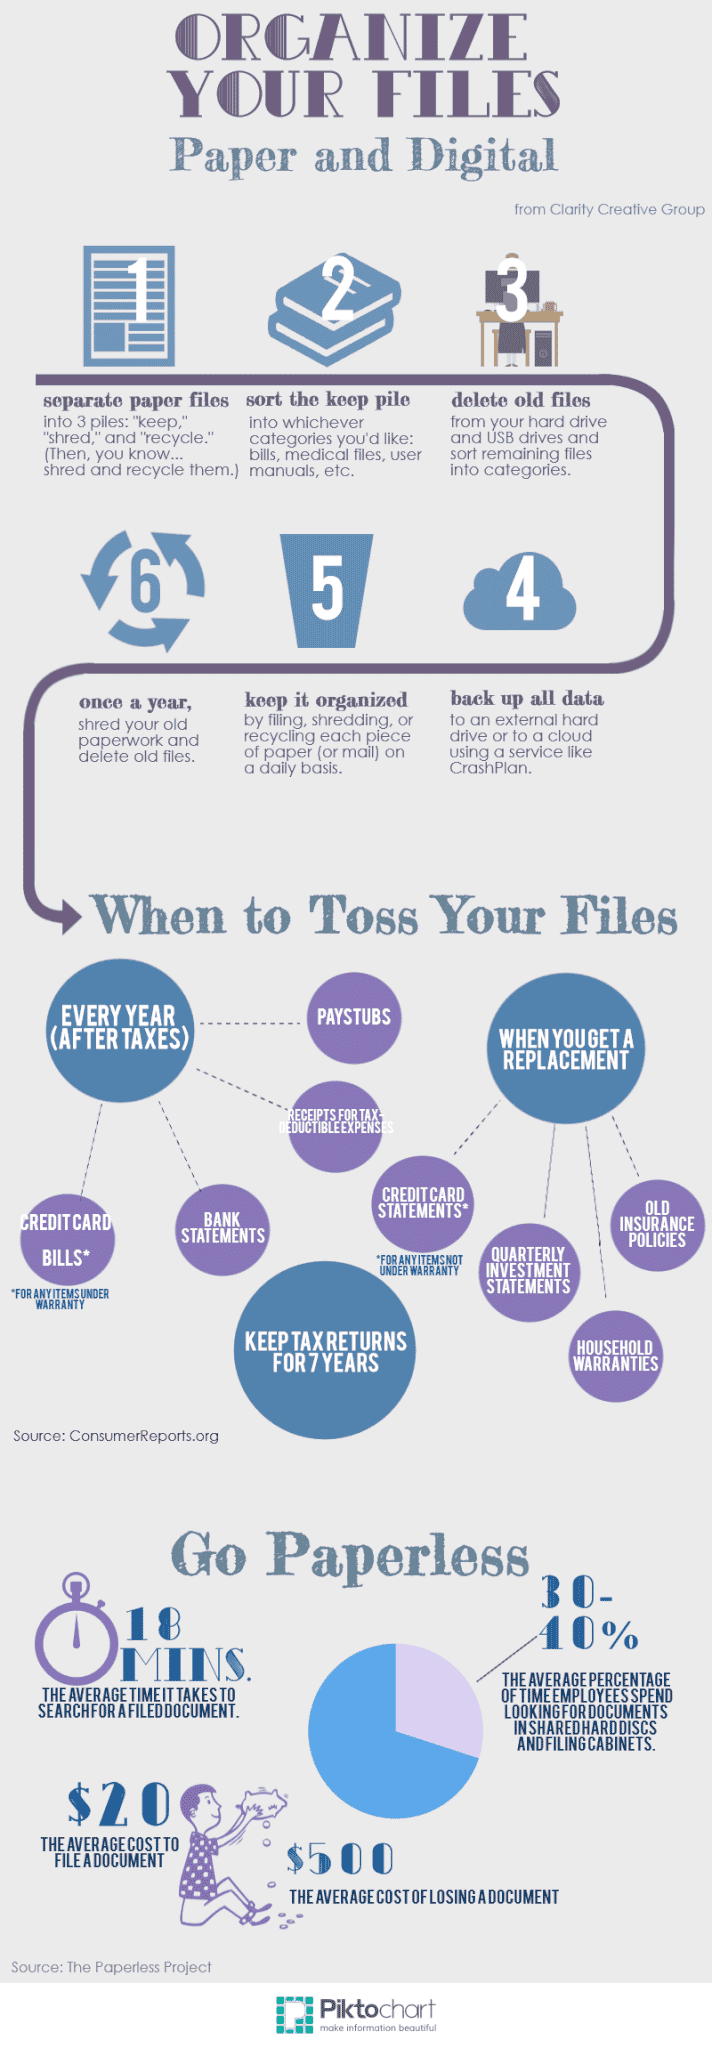 Organize your files